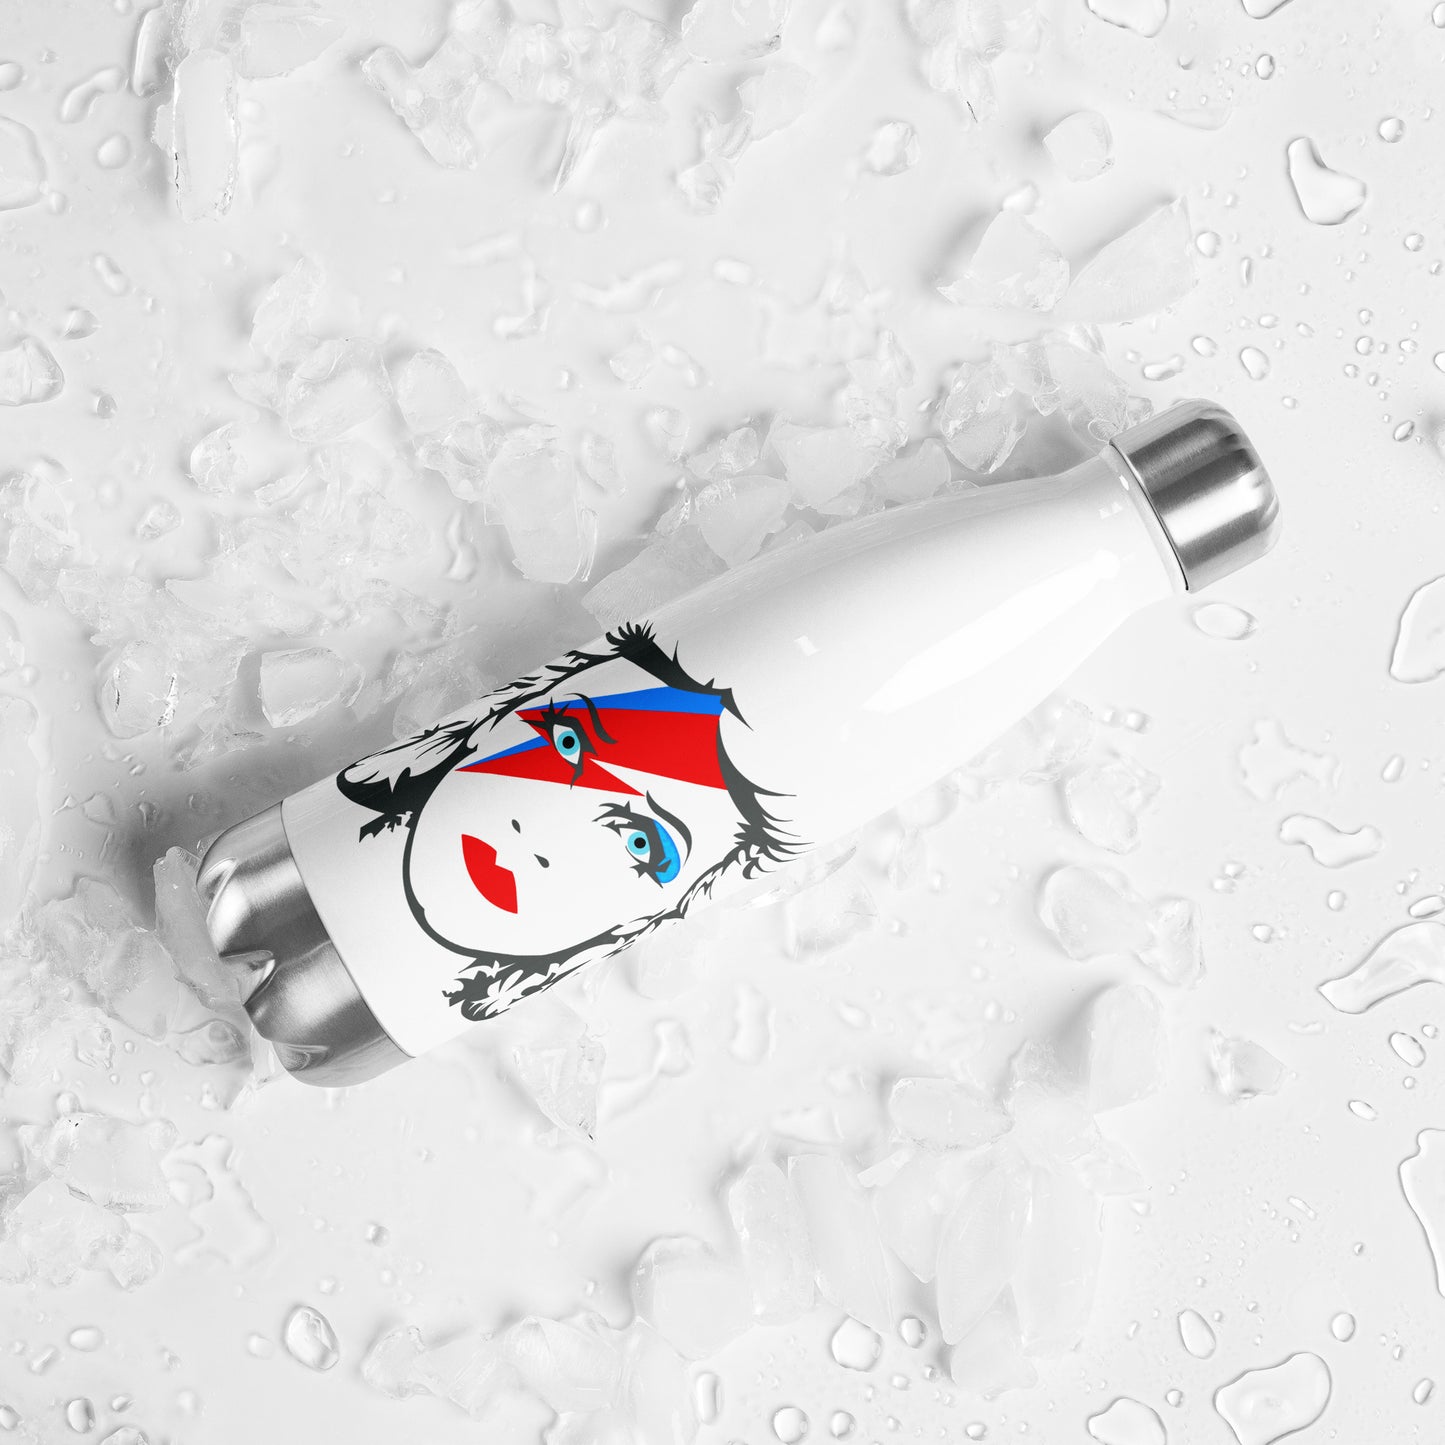 Hedwig Moonage Daydream stainless steel water bottle